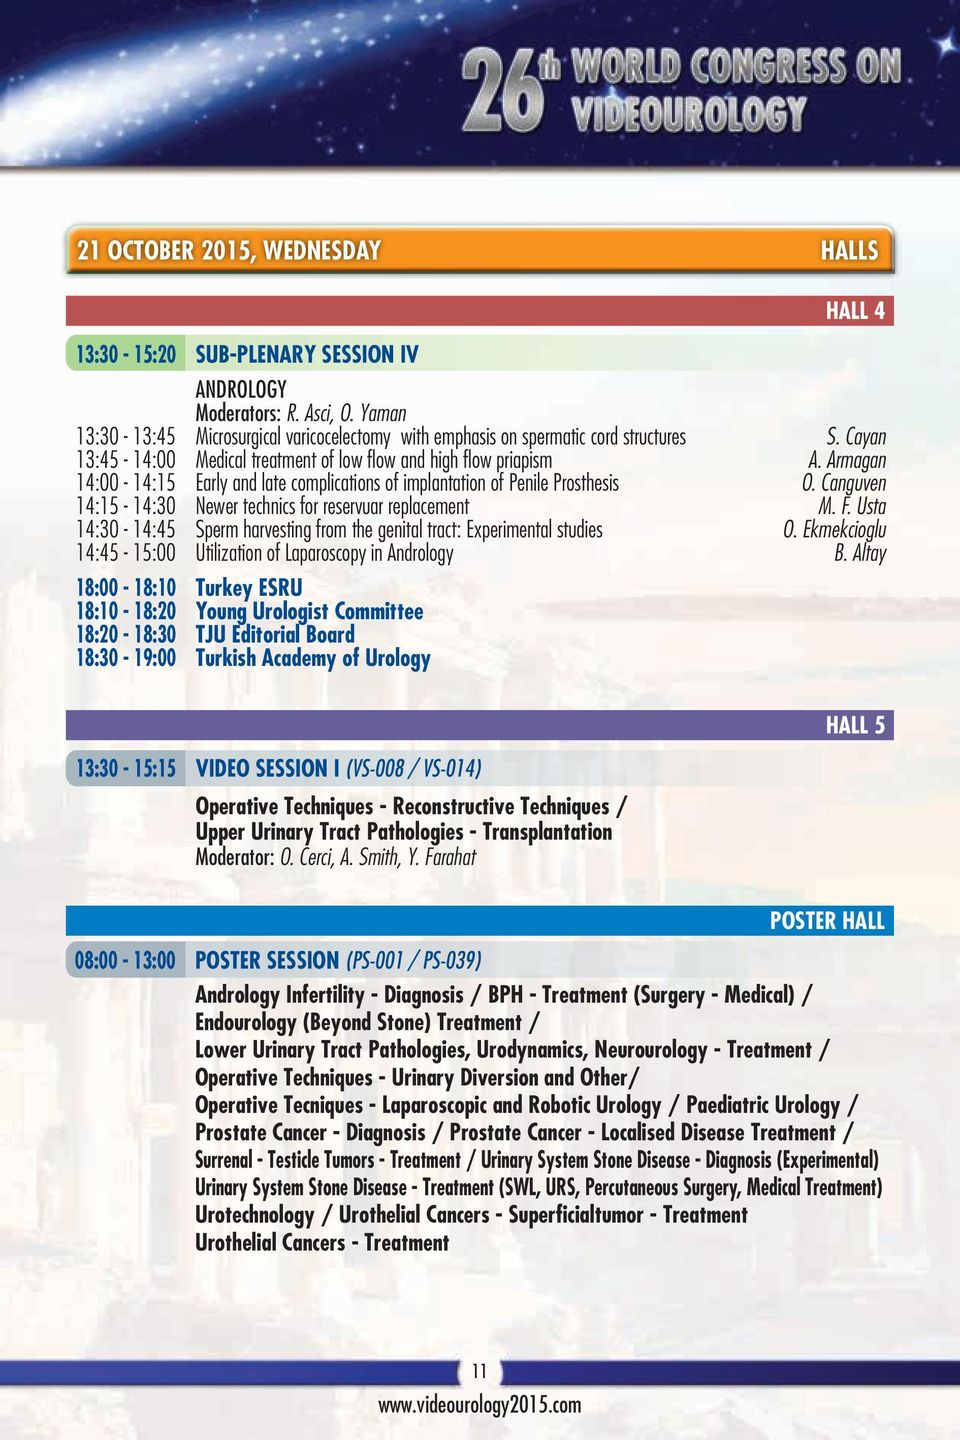 Armagan 14:00-14:15 Early and late complications of implantation of Penile Prosthesis O. Canguven 14:15-14:30 Newer technics for reservuar replacement M. F.